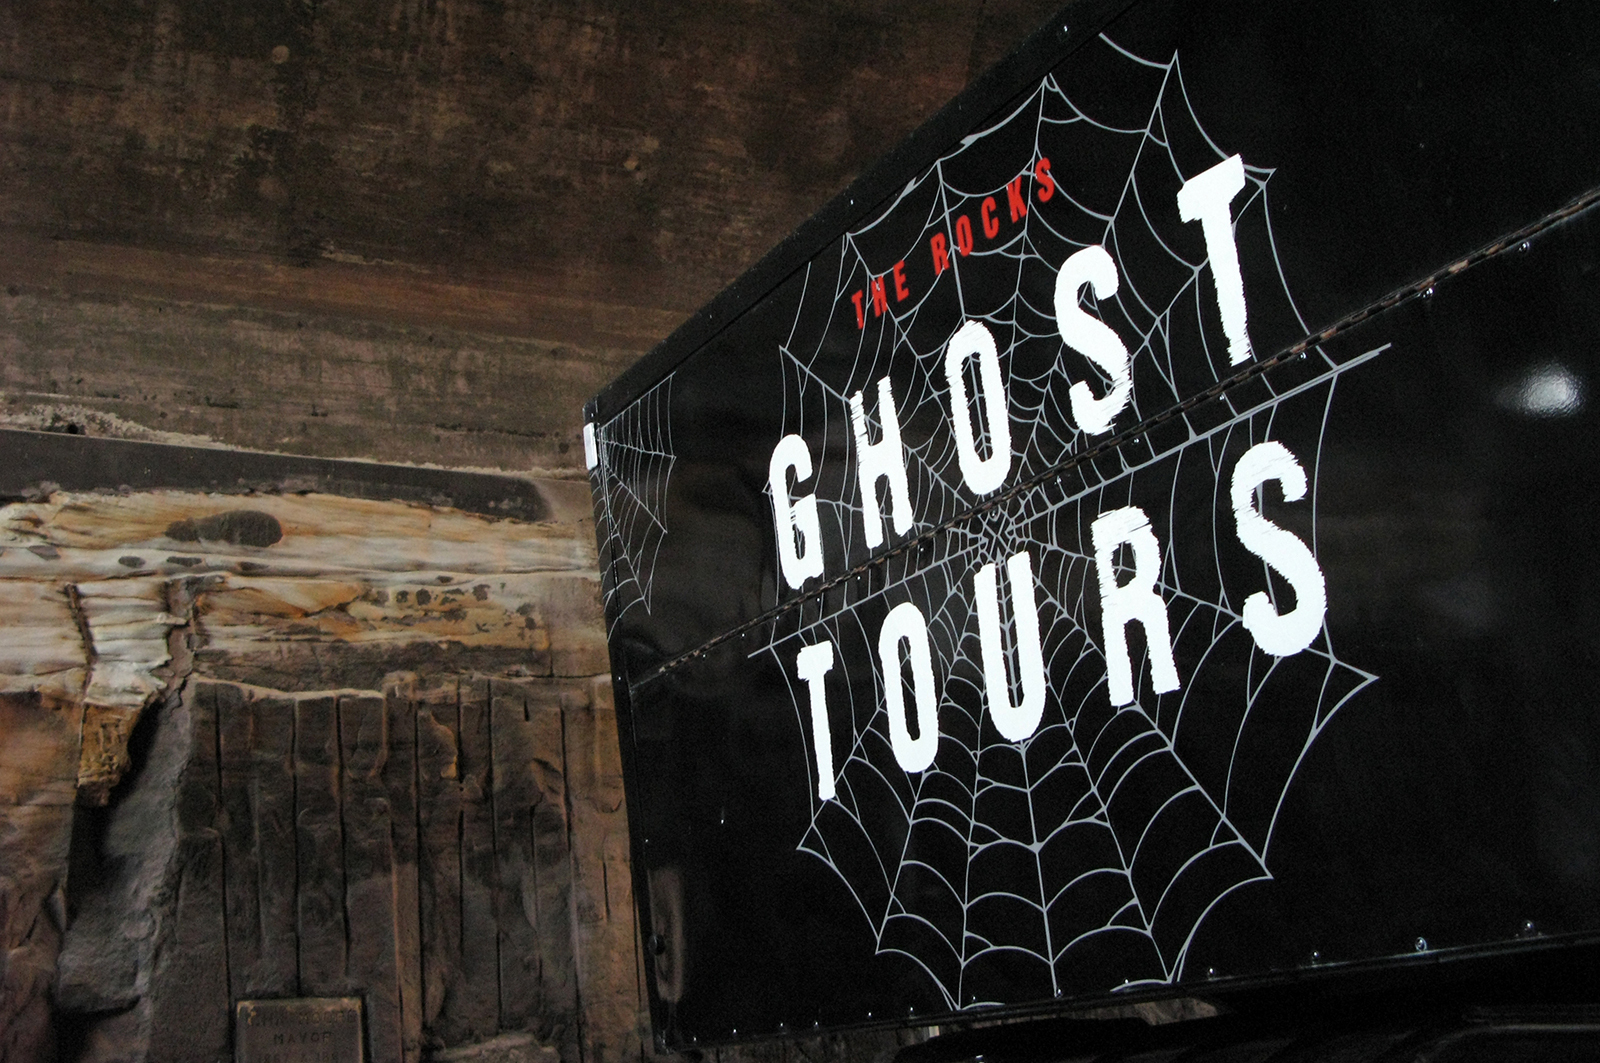 The Rock Ghost Tour